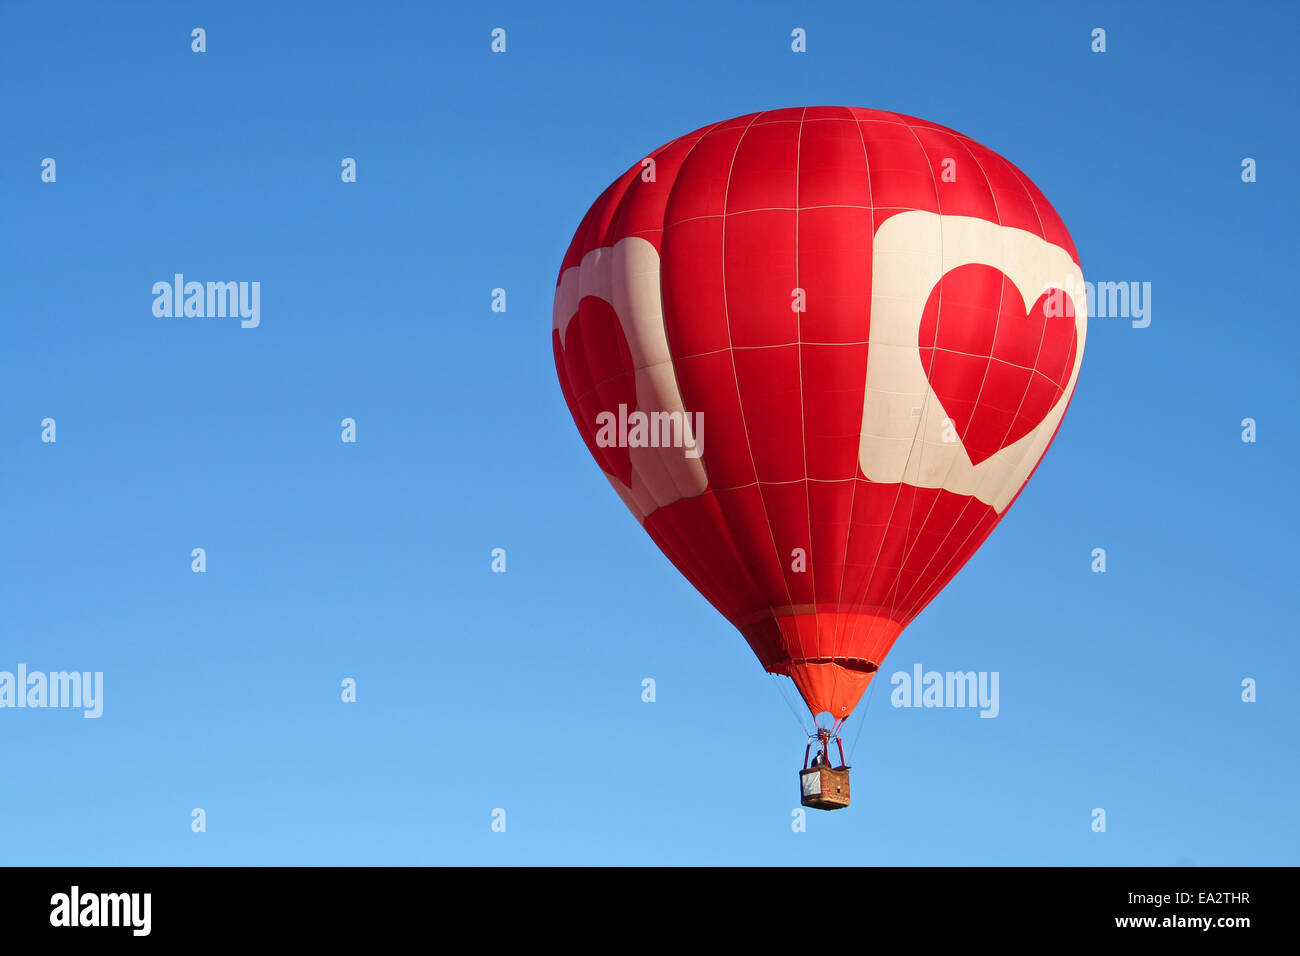 Colorful hot air balloon against a clear blue sky Stock Photo